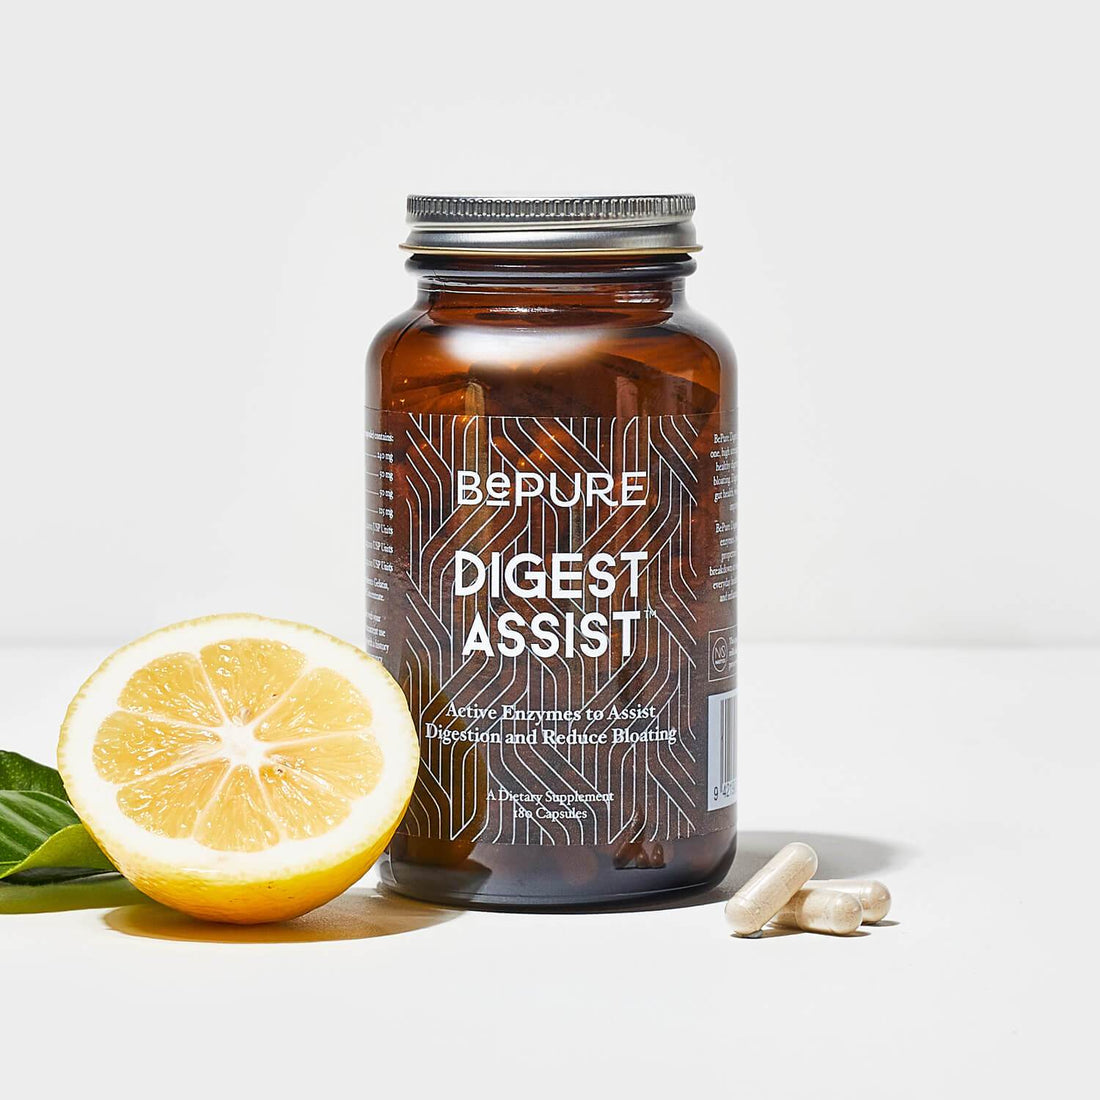 BePure Digest Assist - 60 Day Supply